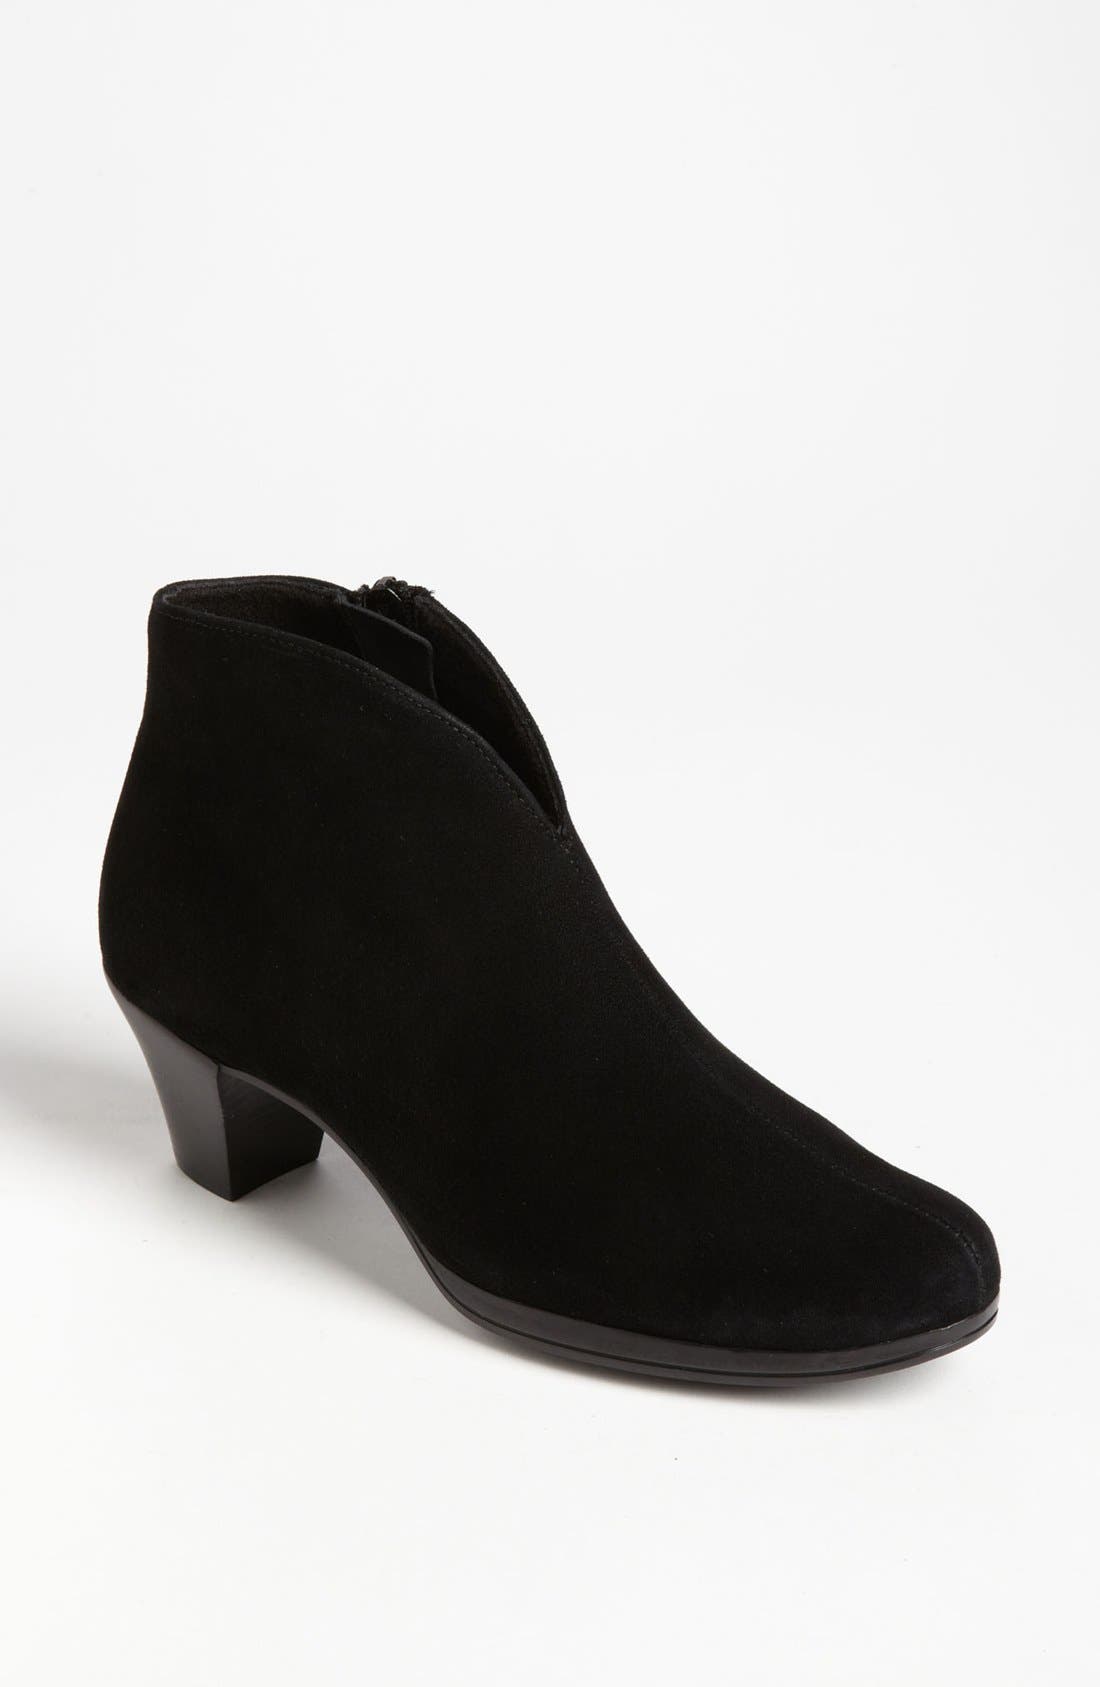 nordstrom anniversary sale munro shoes